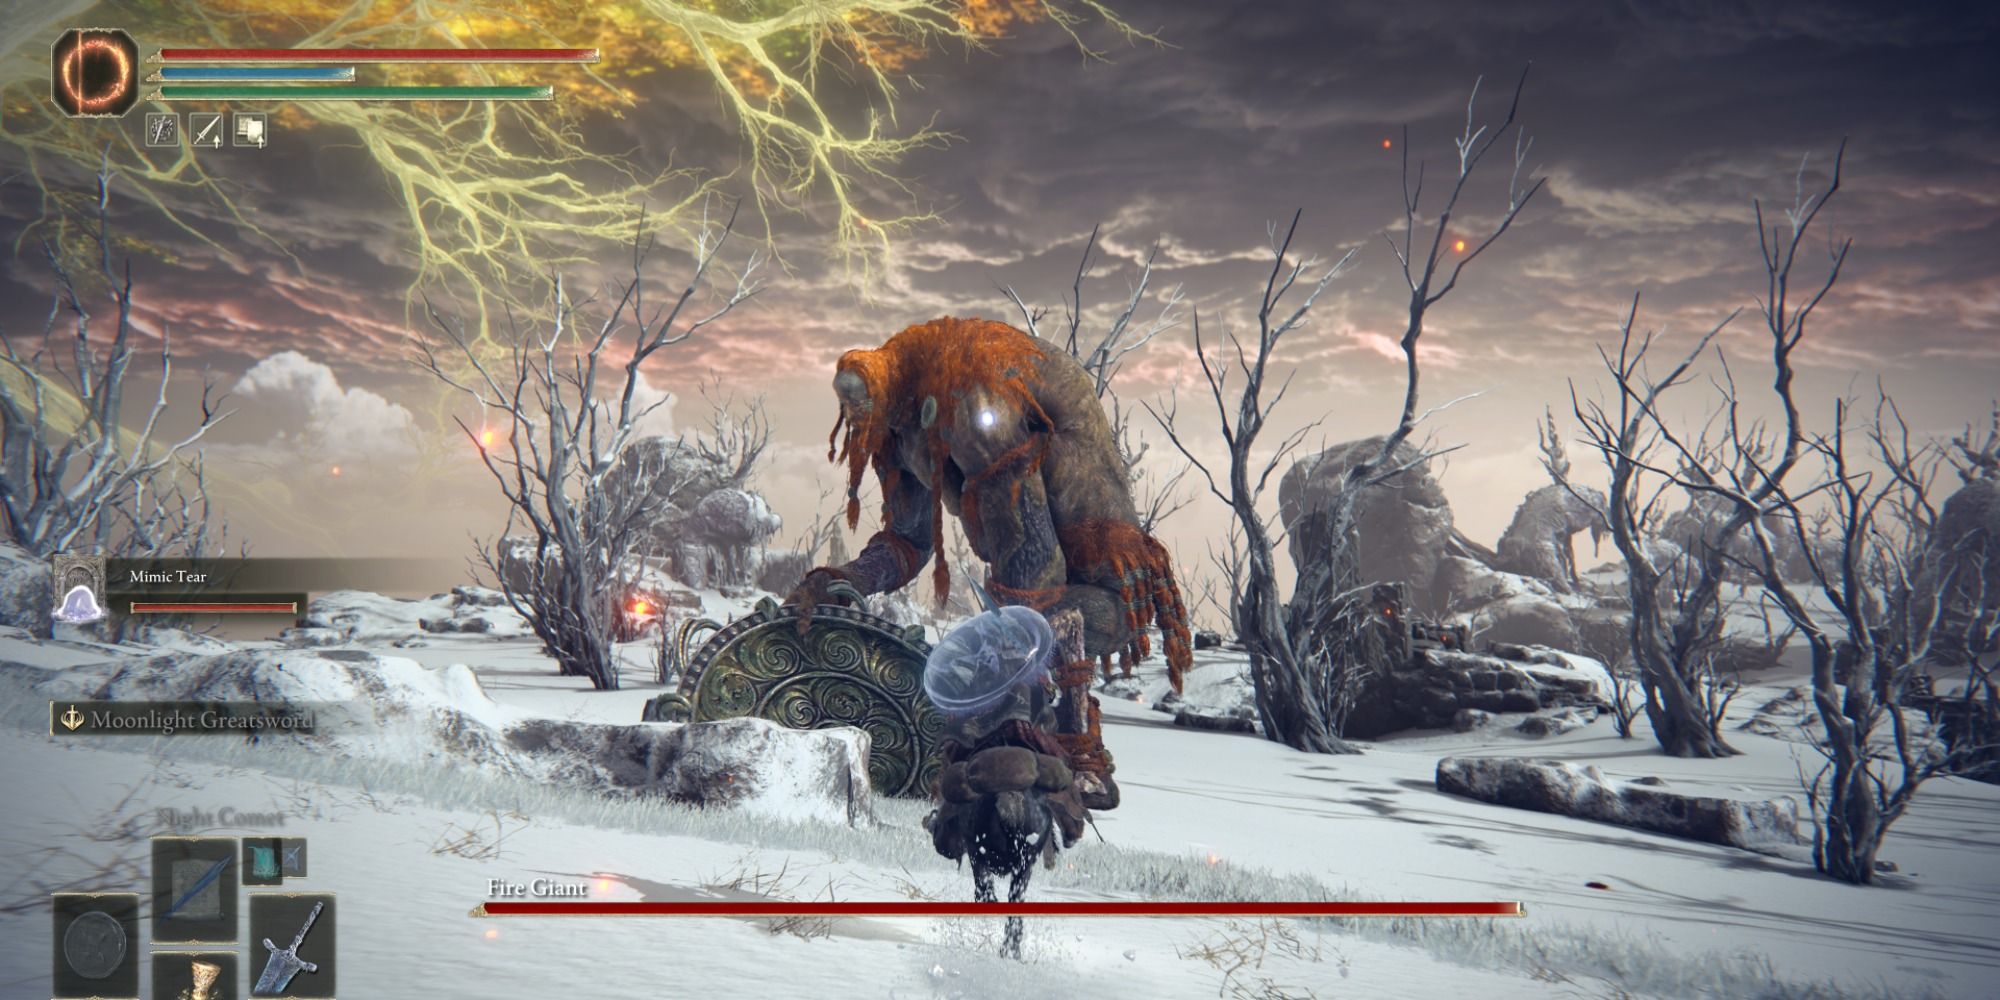 Fire Giant using his great shield as a shovel to launch snow at the player in Elden Ring